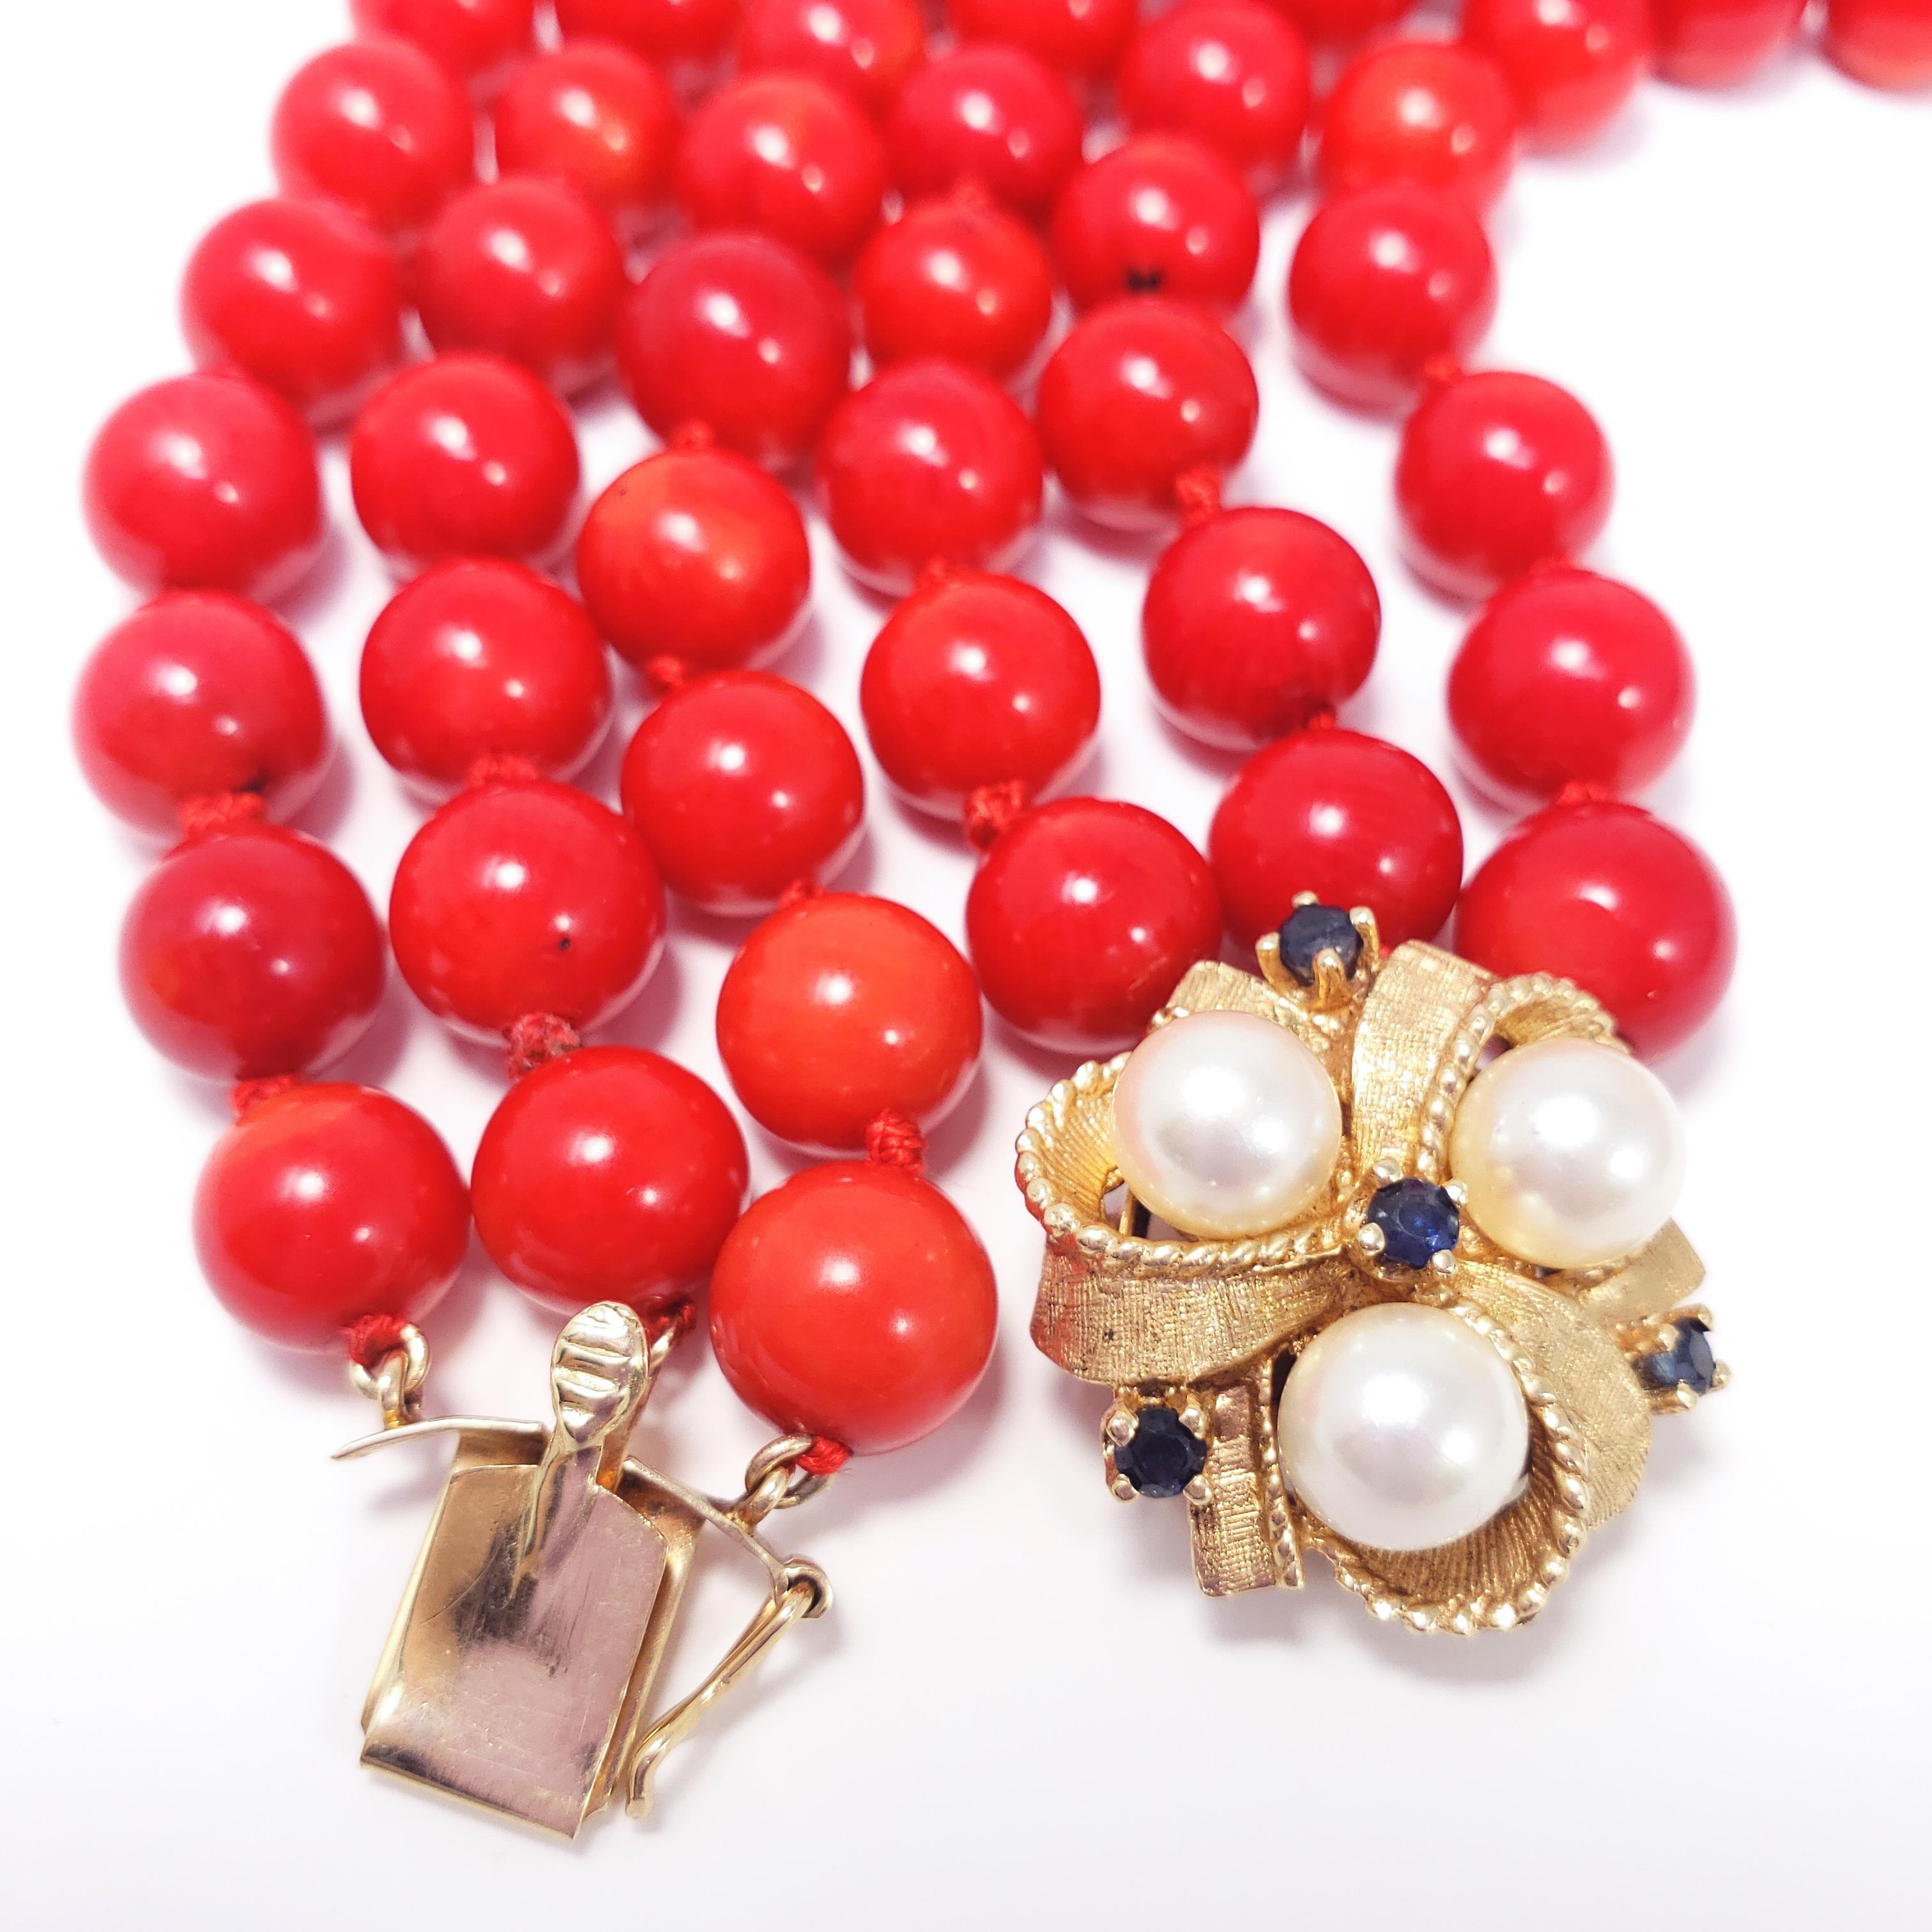 Women's or Men's Three-Strand Genuine Red Coral Necklace, 14 Karat Clasp with Pearls, Sapphires